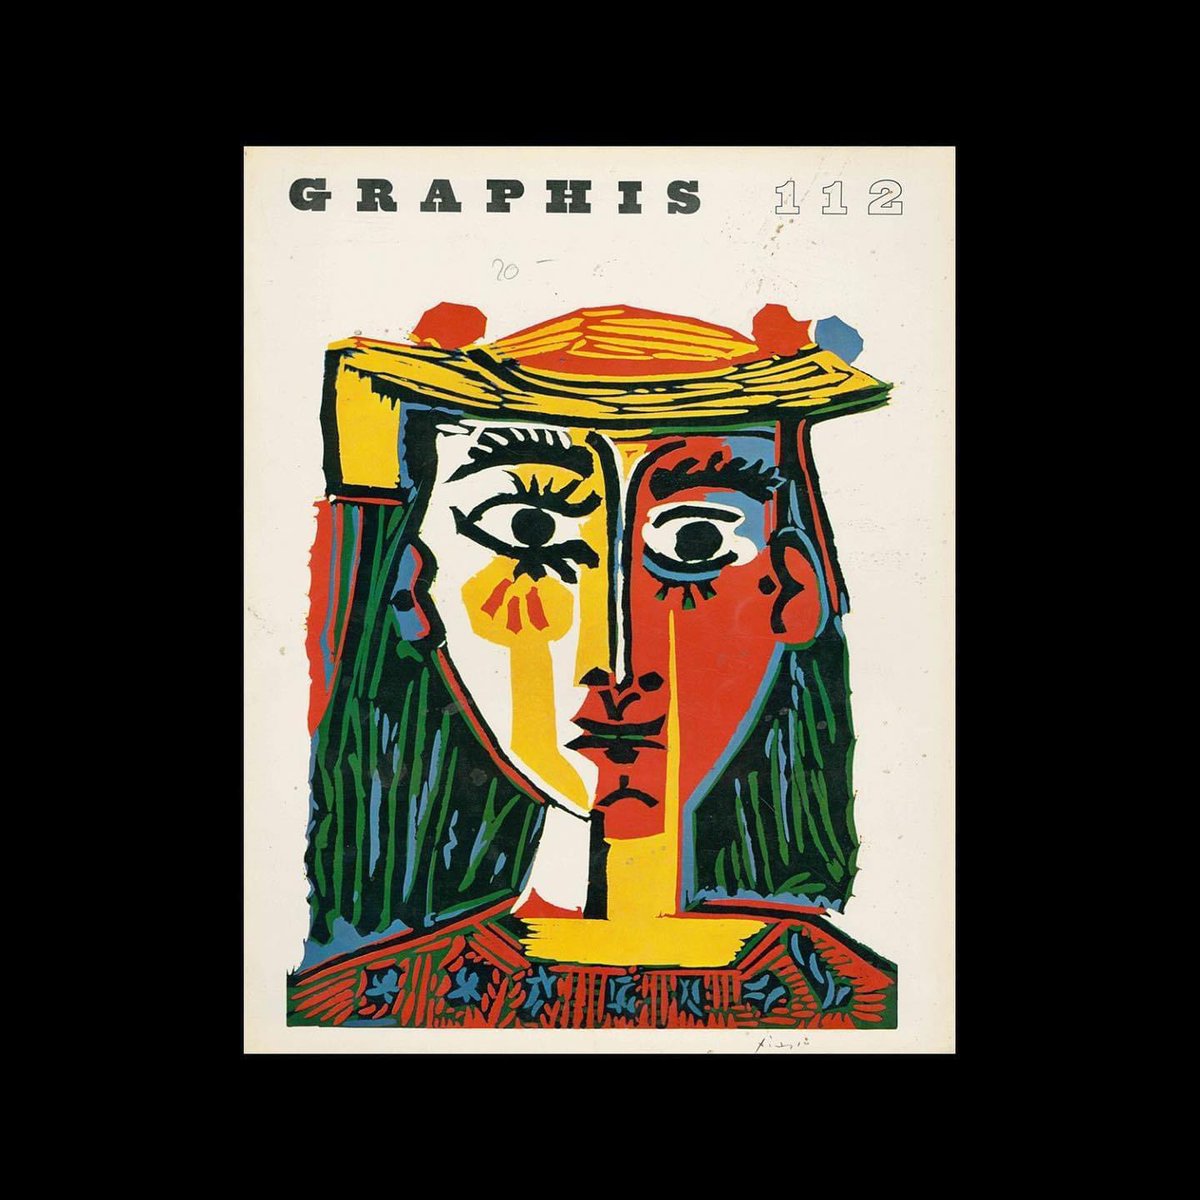 Graphis 112, 1964. Cover design by Pablo Picasso. #pablopicasso #picasso #designarchives #designhistory